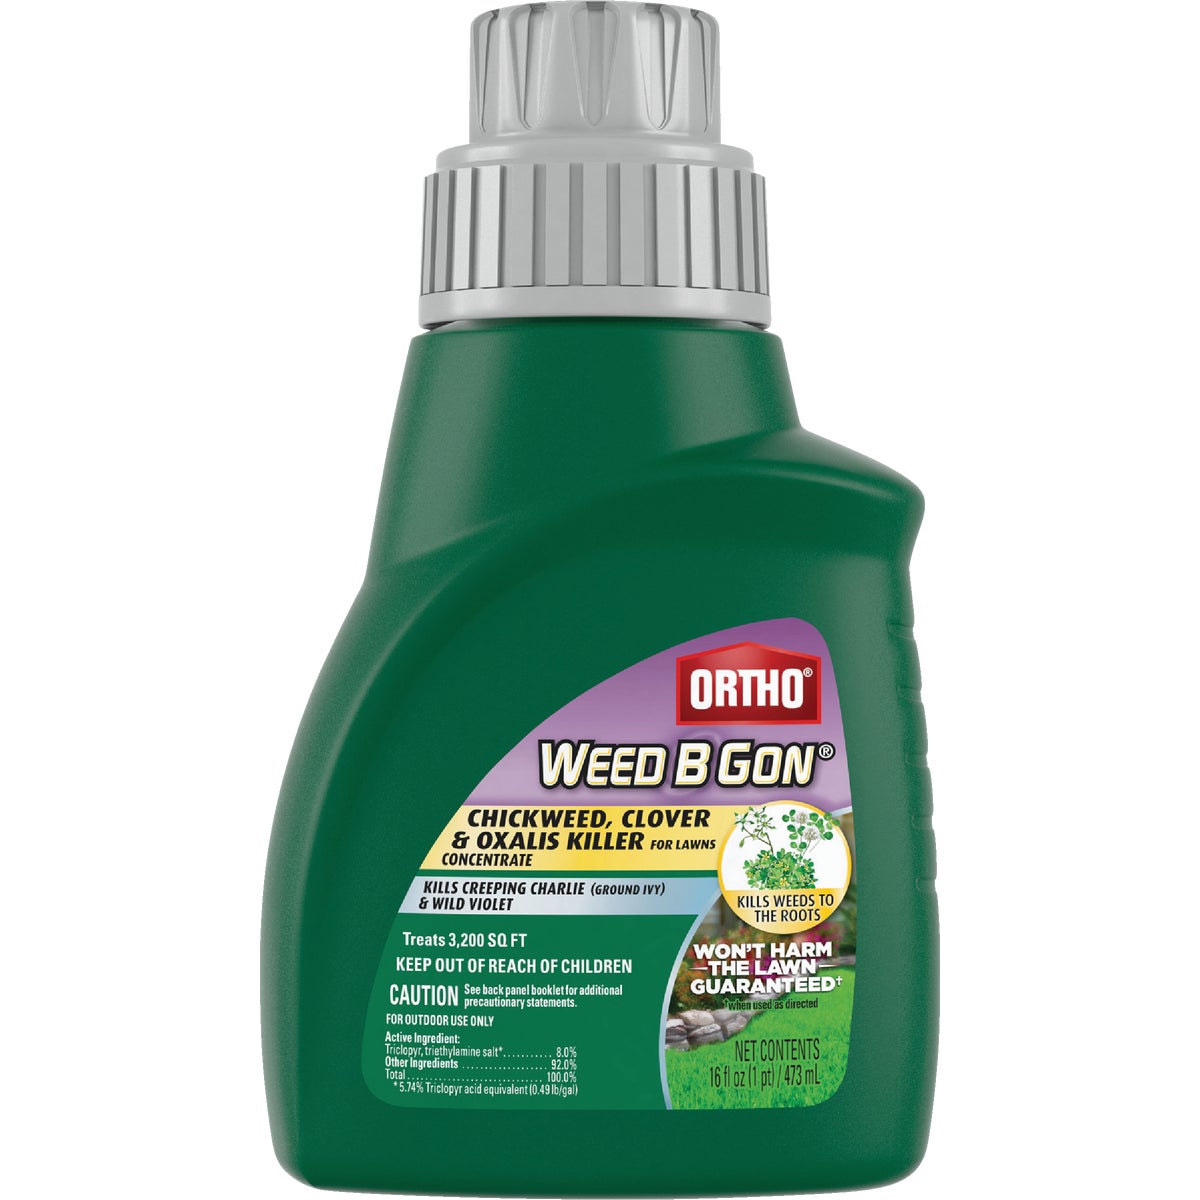 Item 758200, Weed killer formulated to kill tough weeds in your lawn, when used as 